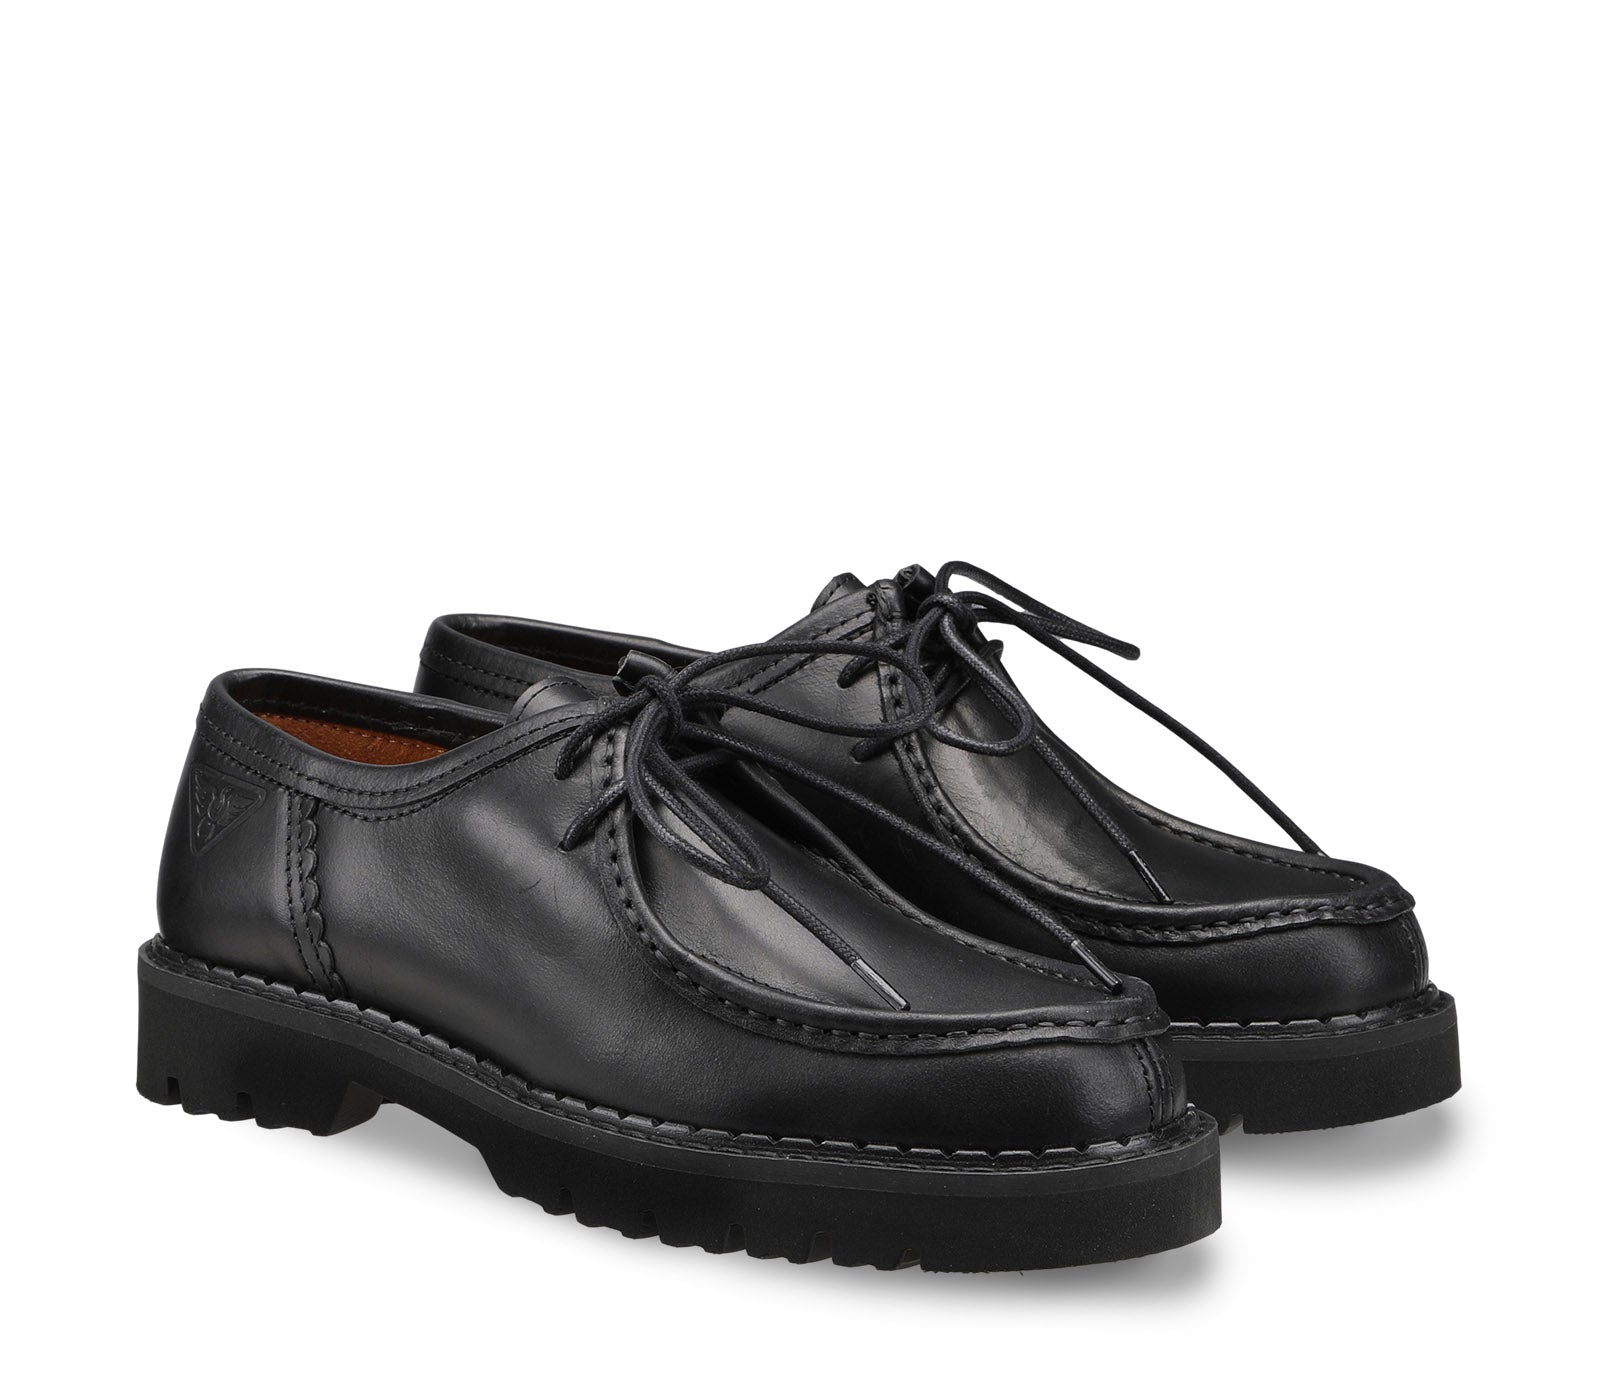 Women's Black Leather Shoe with Laces and Voluminous Sole